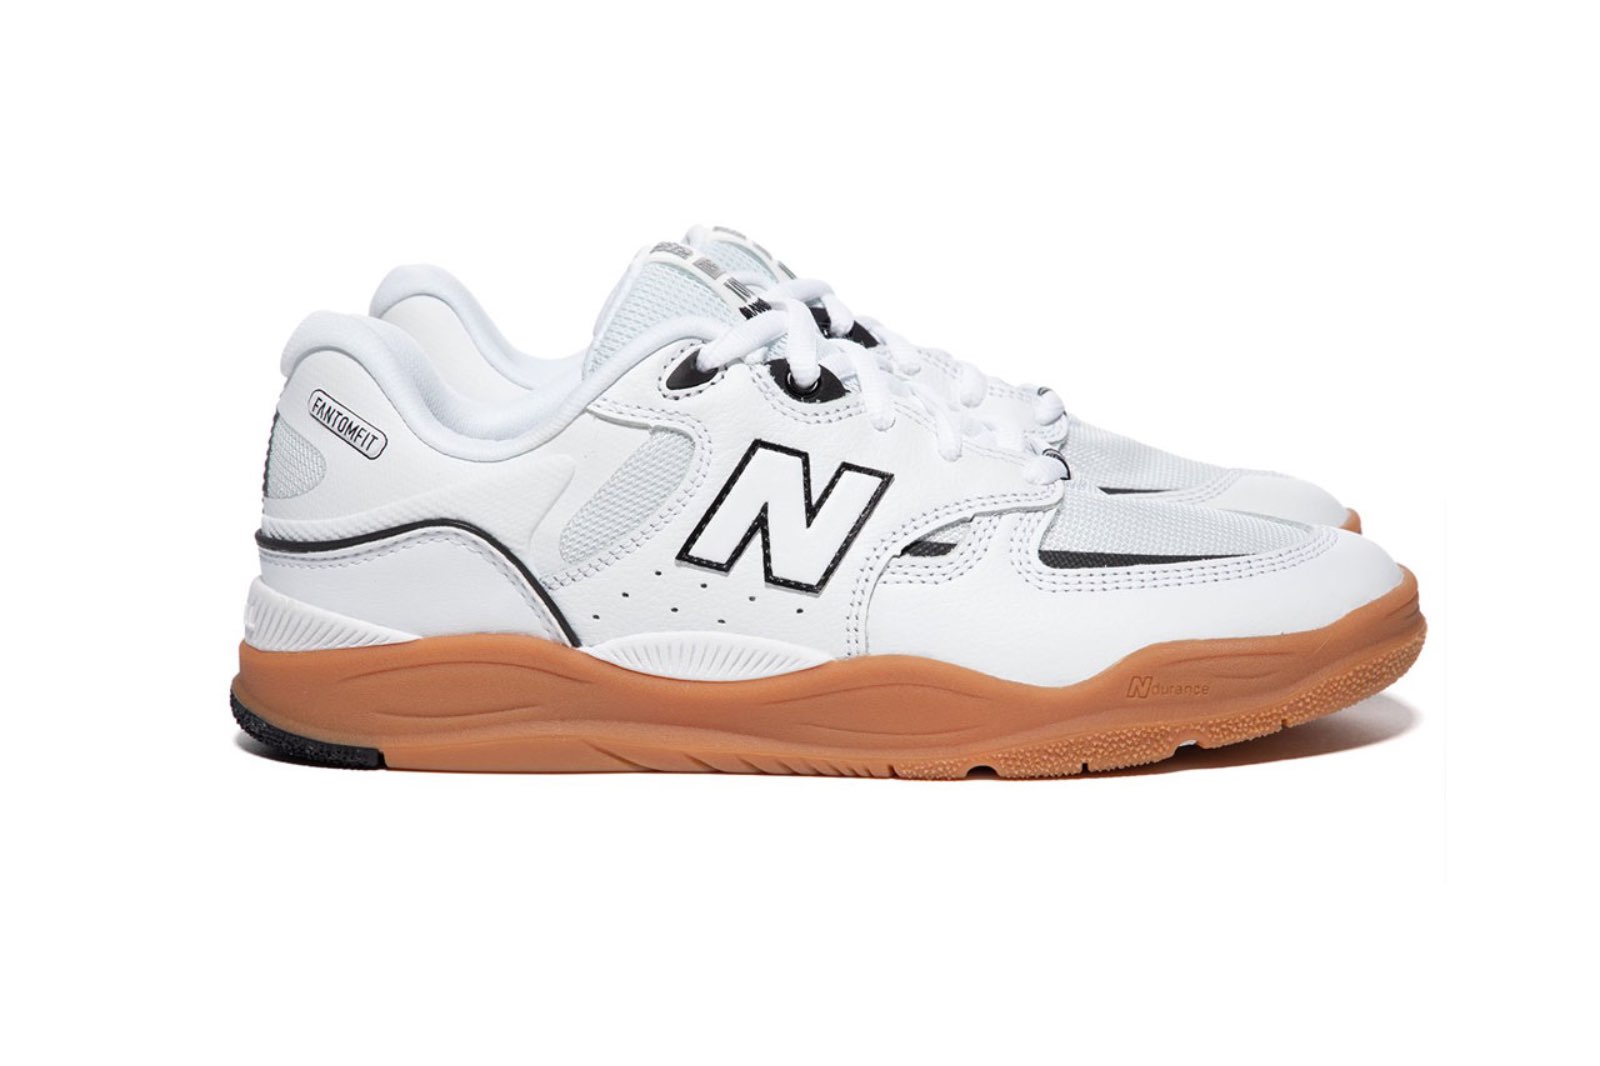 Giày New Balance Numeric 1010 Silhouette trắng